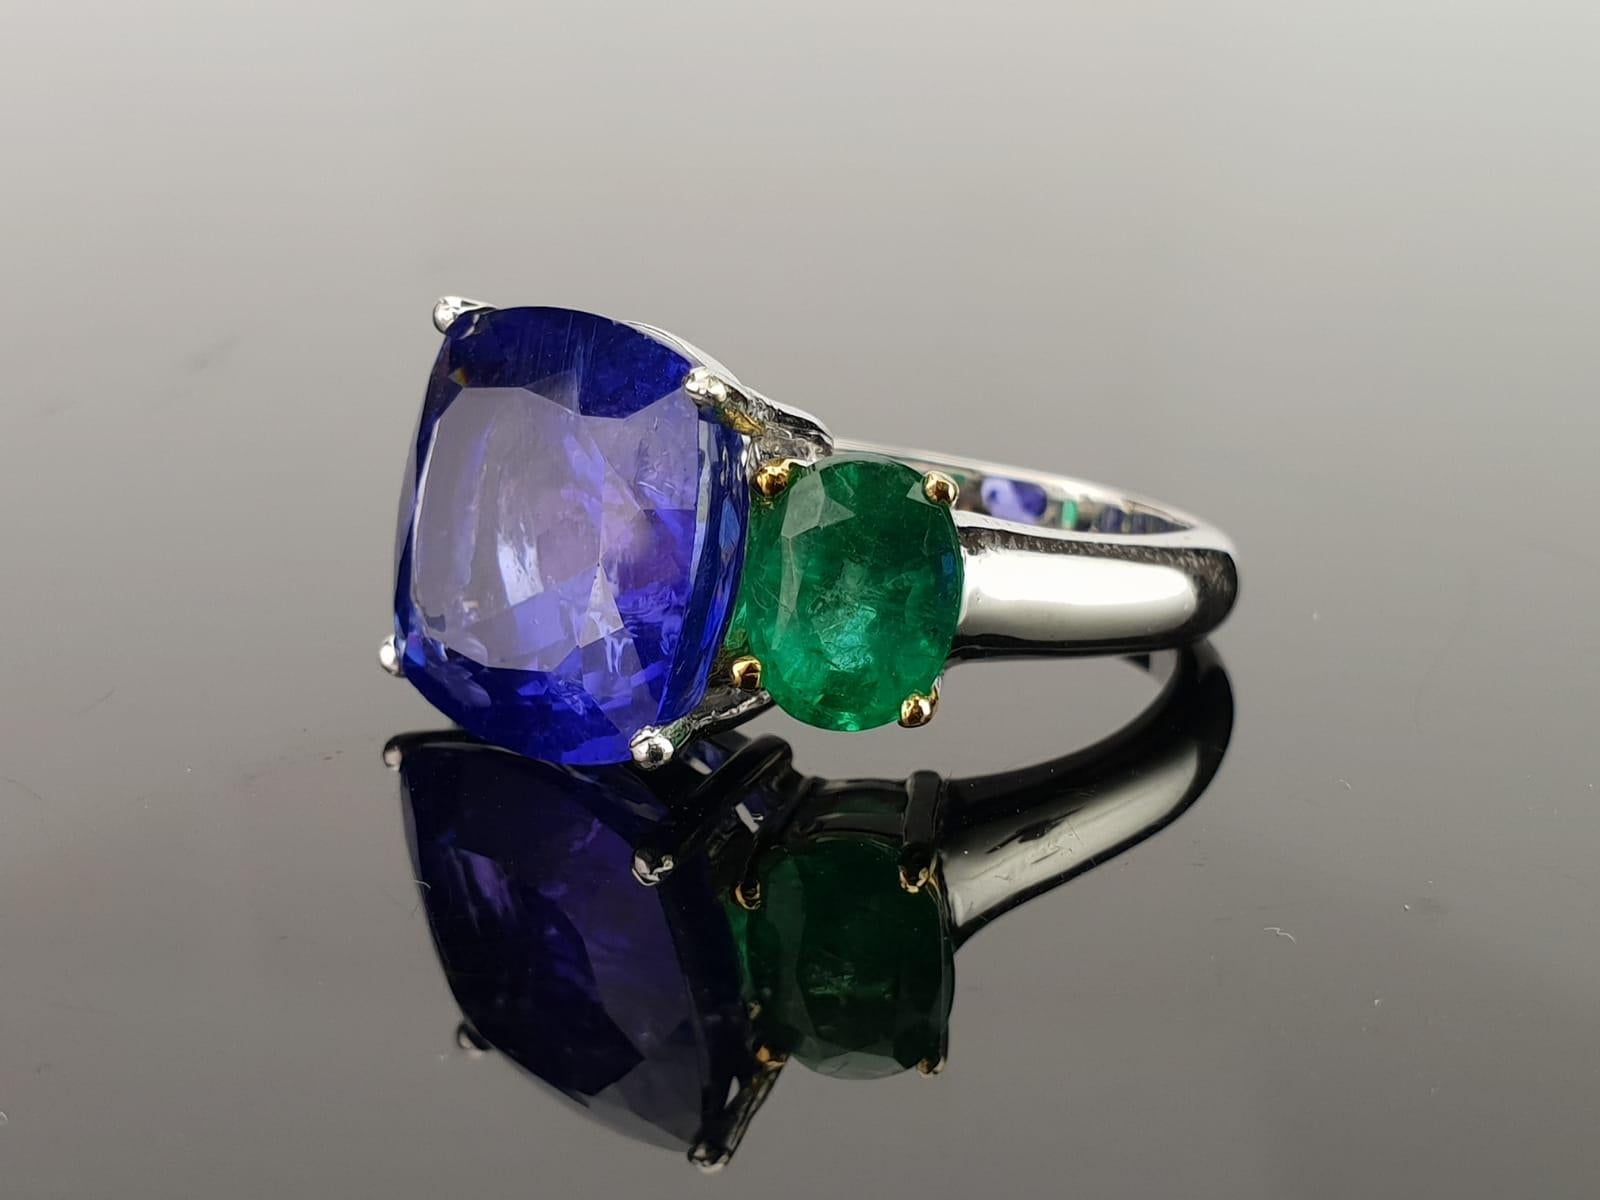 A unique cocktail and three-stone ring, with a beautiful, transparent Tanzanite centre stone, and lustrous Zambian Emerald side stones set in 18K White Gold. Certificate can be provided upon request. 

Centre Stone Details:  
Stone: Tanzanite
Cut: